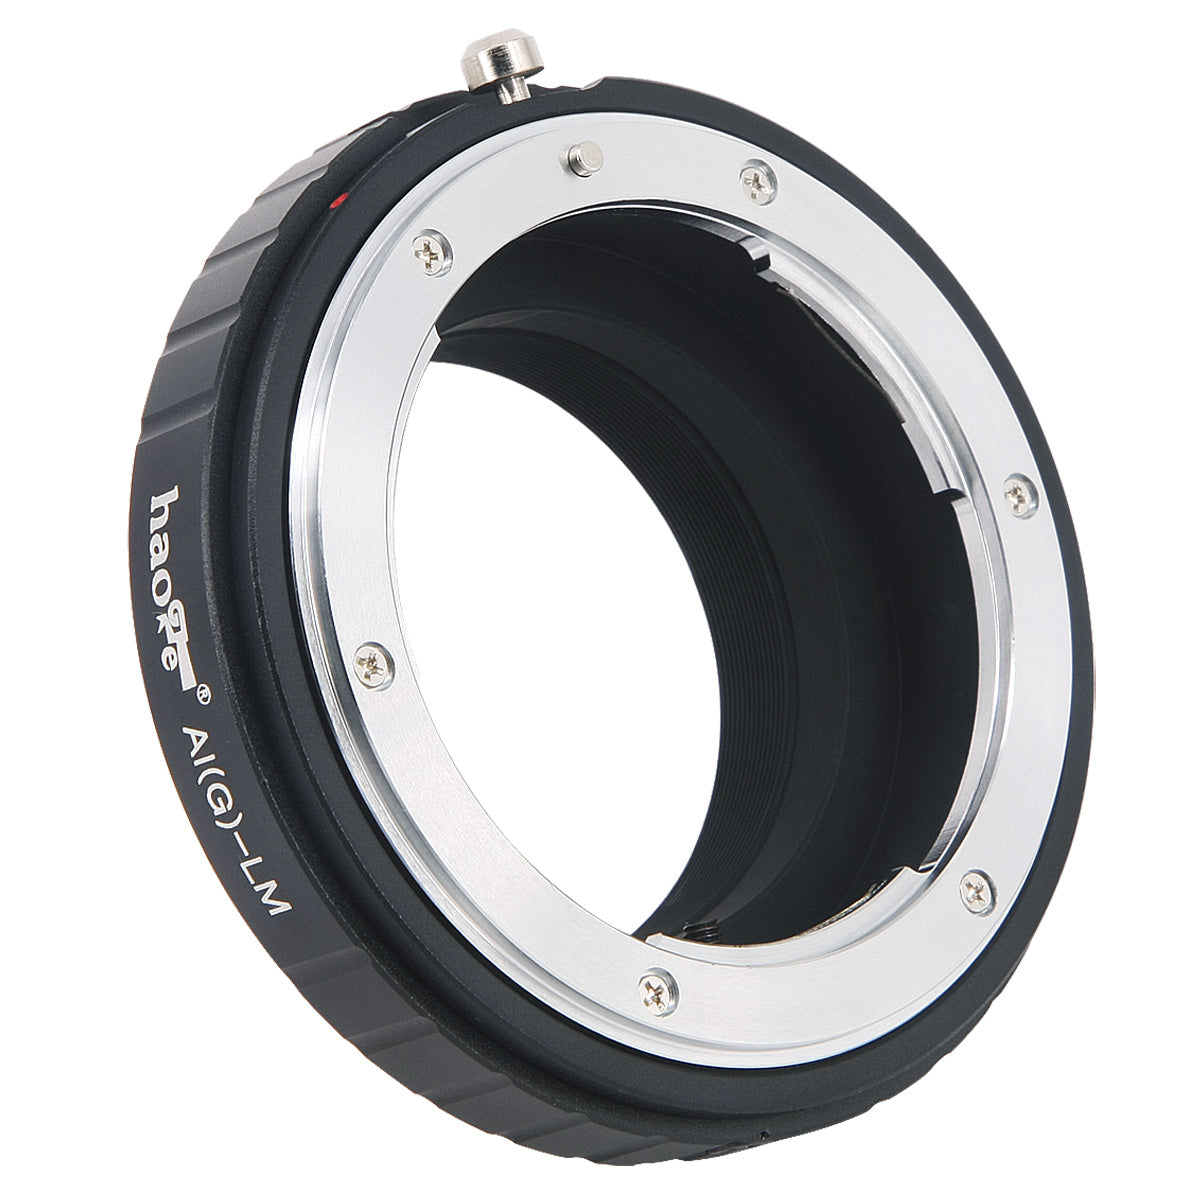 Haoge Lens Mount Adapter for Nikon Nikkor AI / AIS / G / D Lens to Leica M-mount Camera such as M240, M240P, M262, M3, M2, M1, M4, M5, CL, M6, MP, M7, M8, M9, M9-P, M Monochrom, M-E, M, M-P, M10, M-A